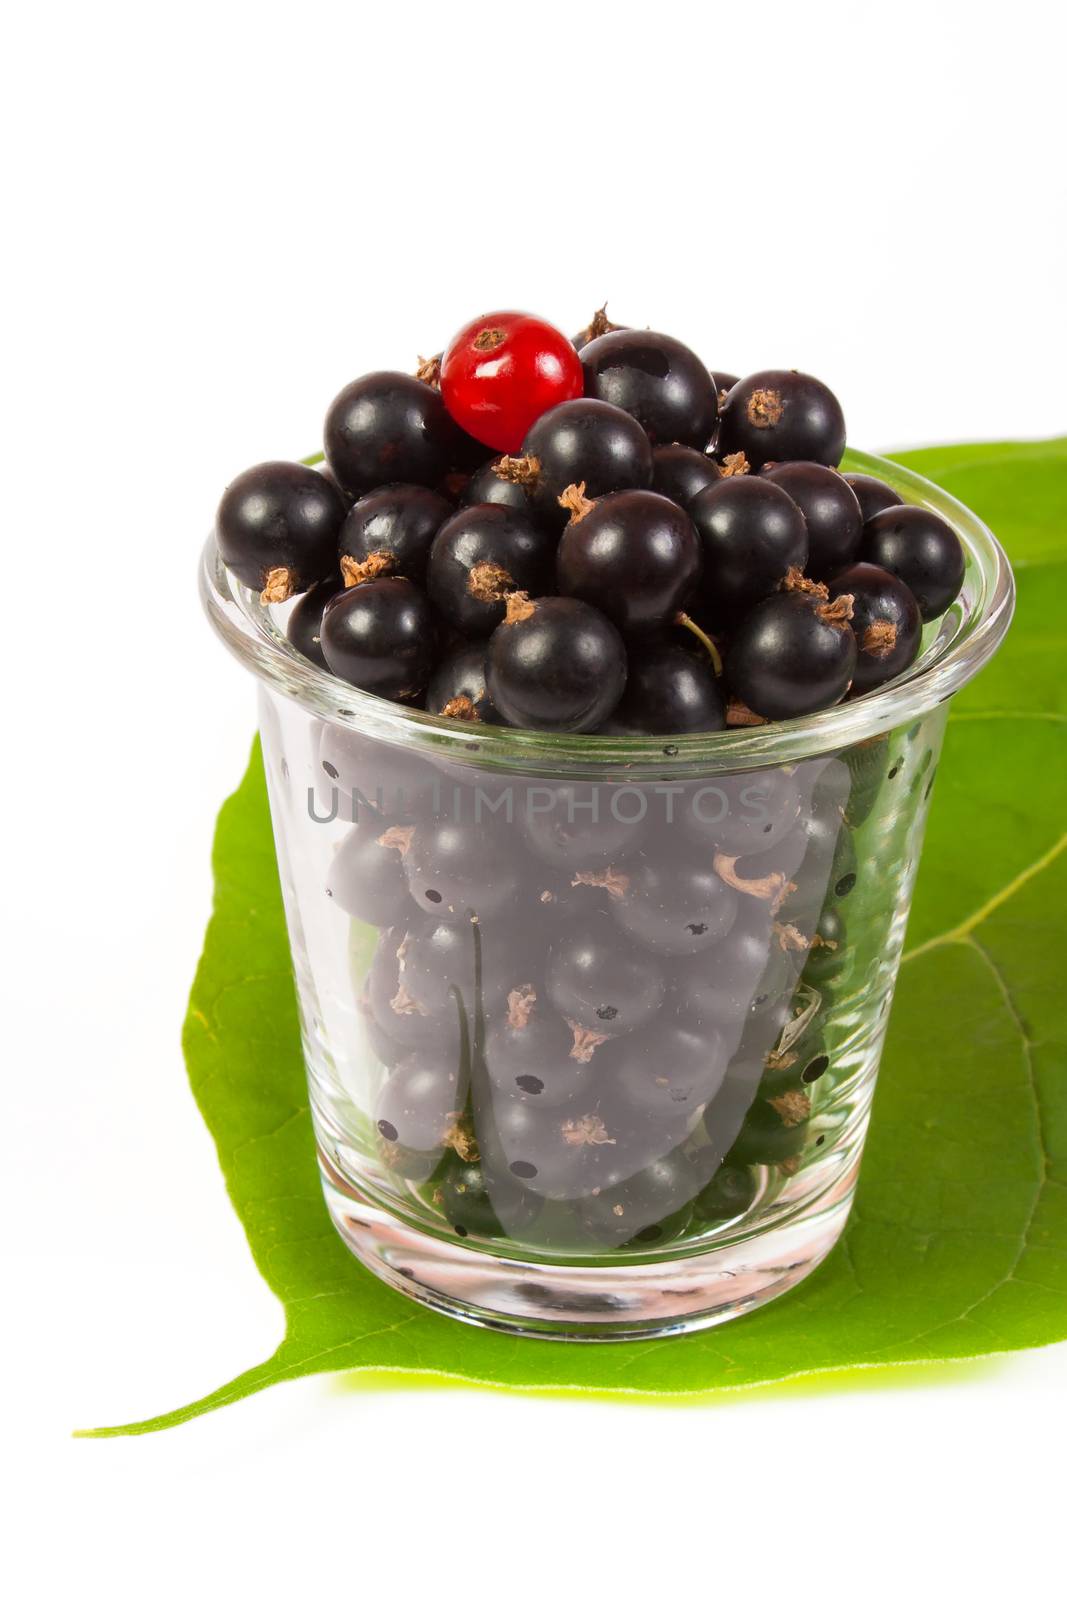 black currants in a glass  on the big green leaf